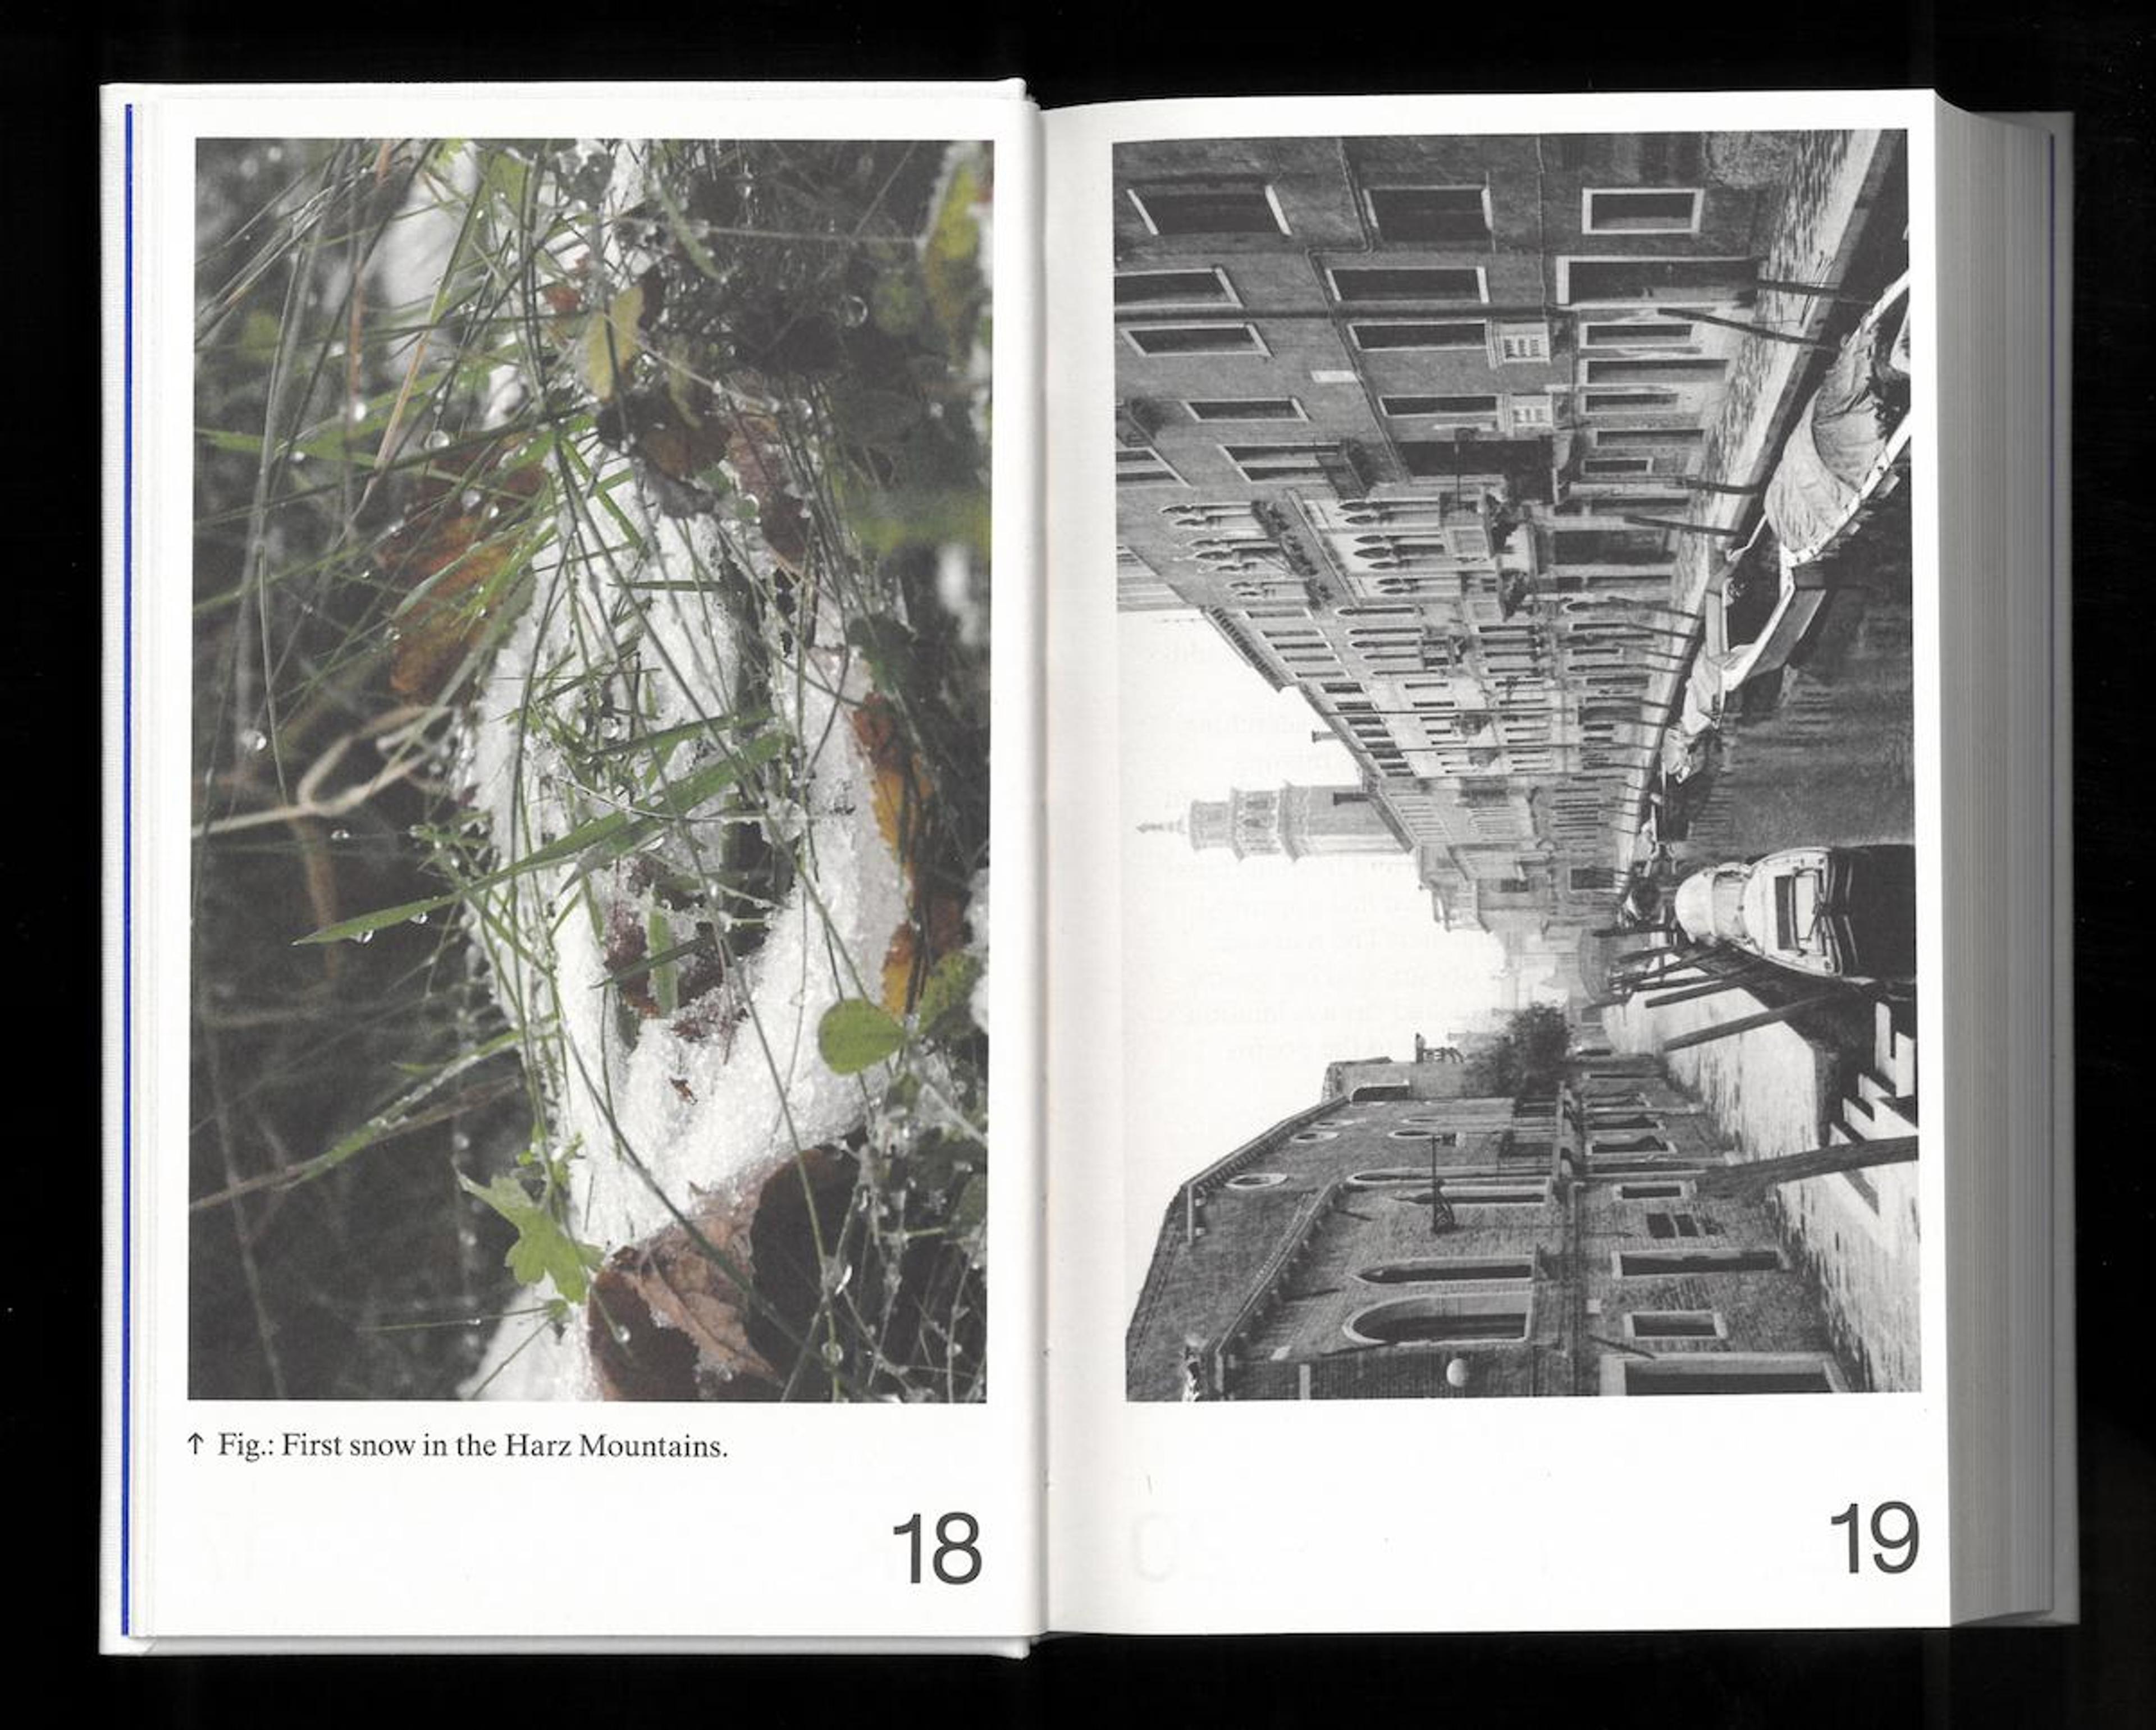 Scan from &ldquo;The Snows of Venice&rdquo; &copy; Spector Books